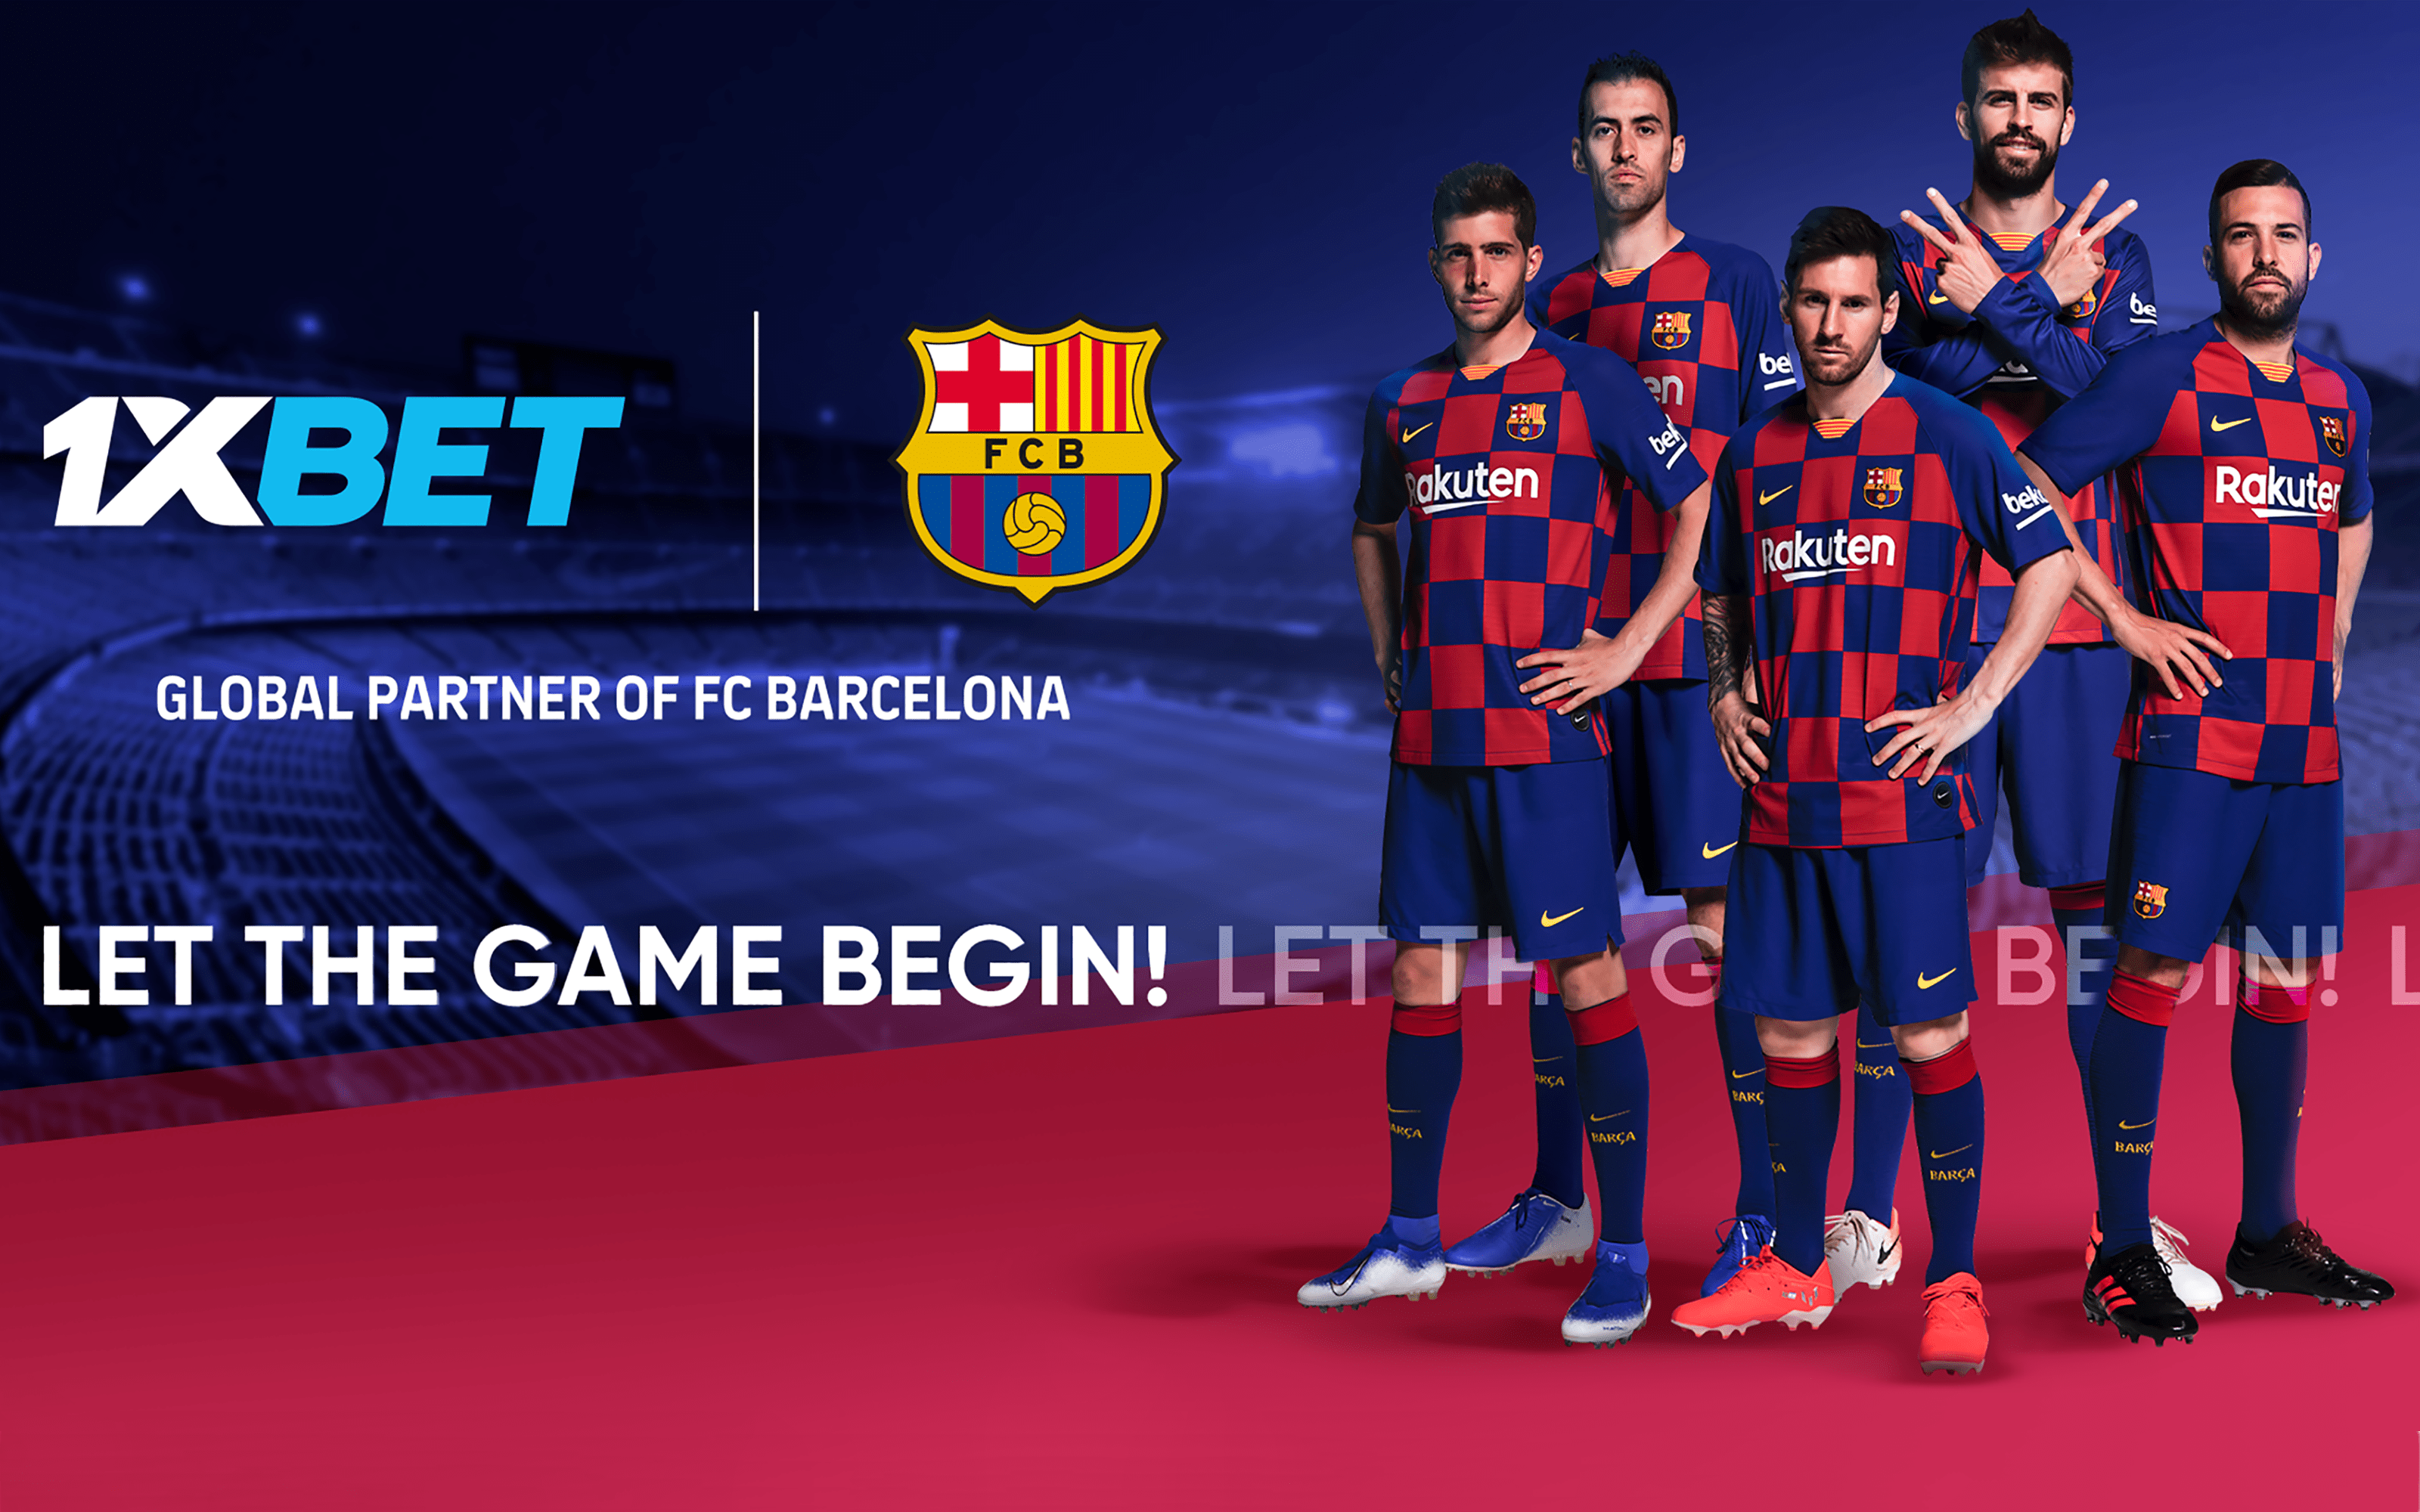 FC Barcelona adds 1XBET as a new global partner